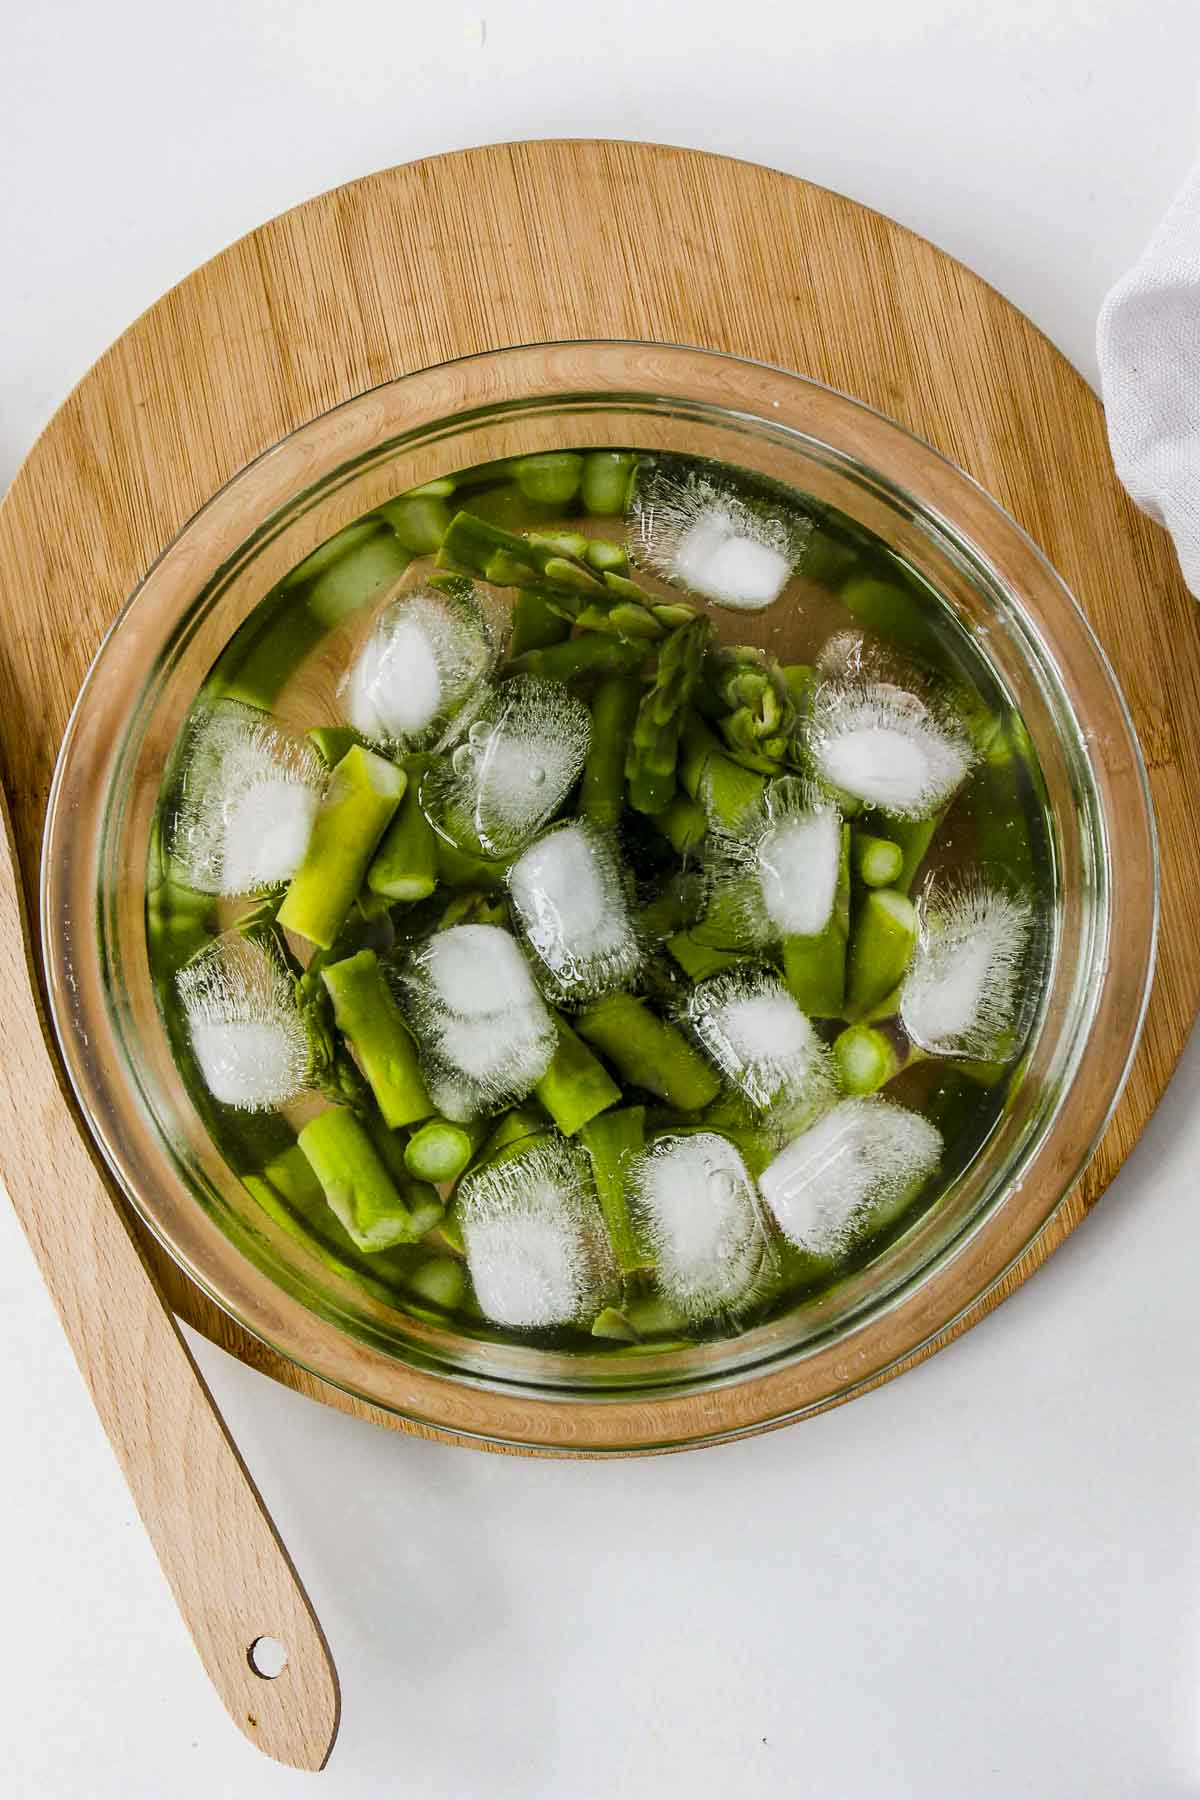 Asparagus in ice water.